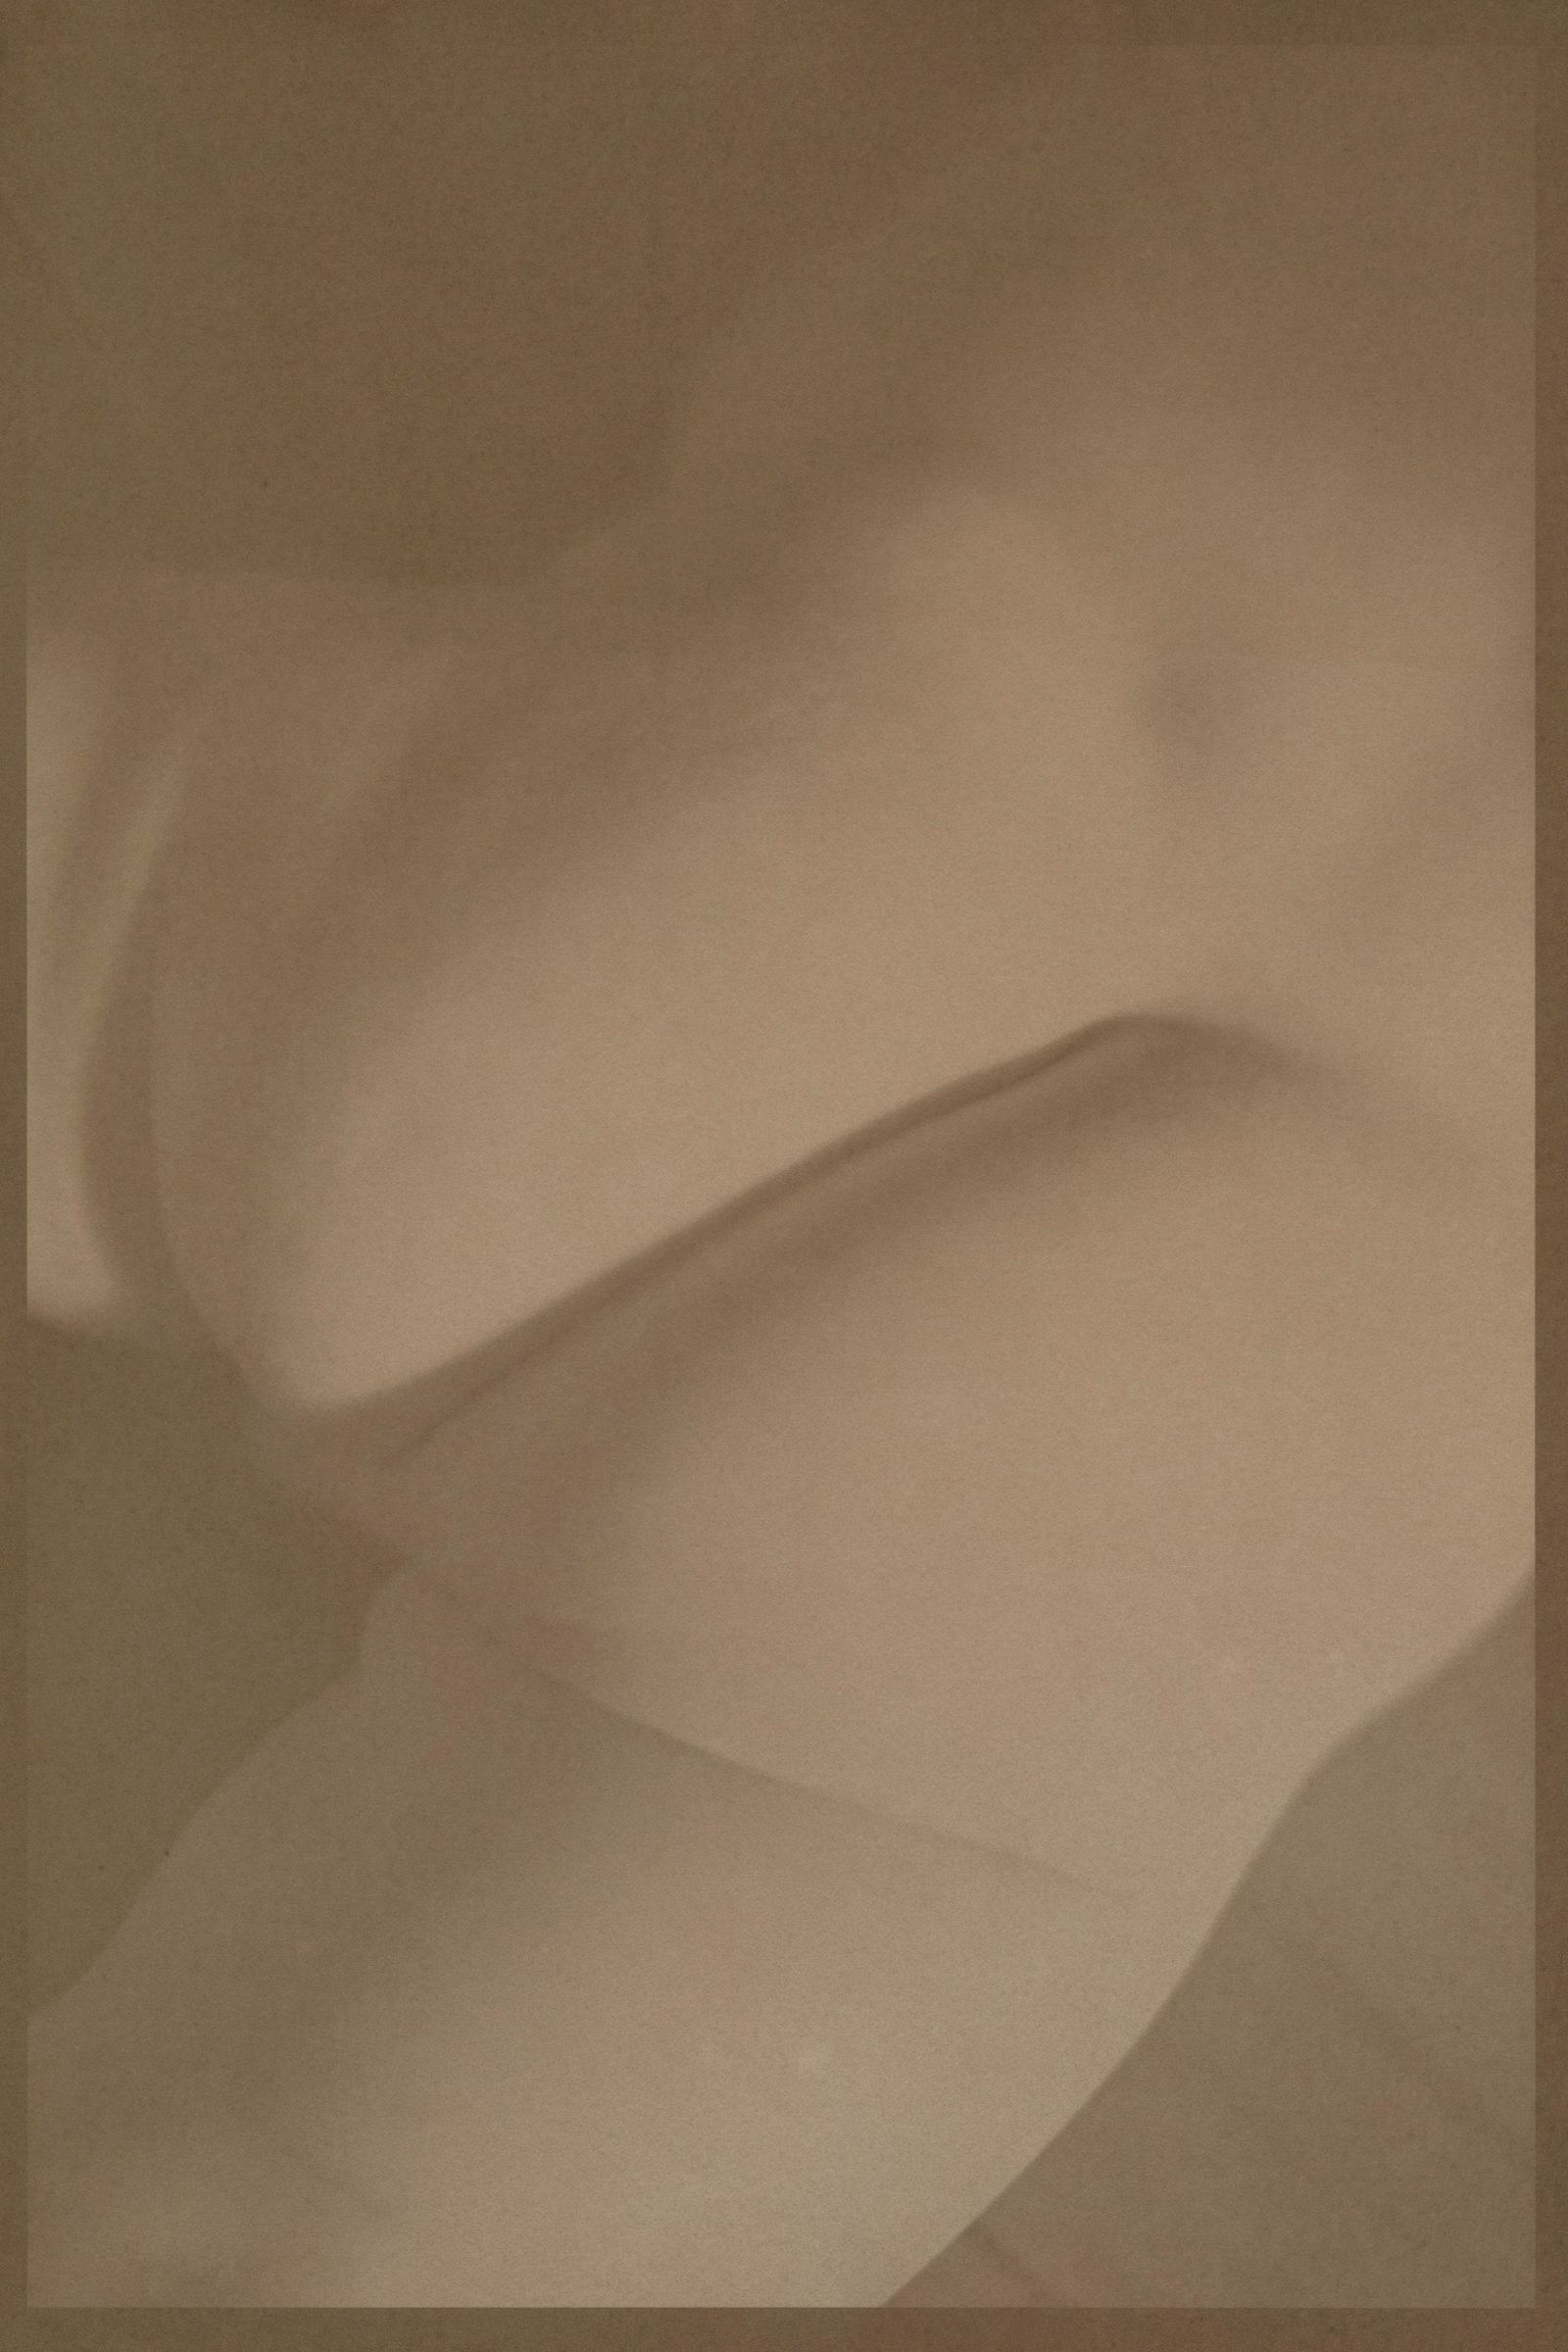 © Eleanor Oakes - Philosopher (3), 2022. 9x13.5" Salted Paper Print made with Breastmilk.